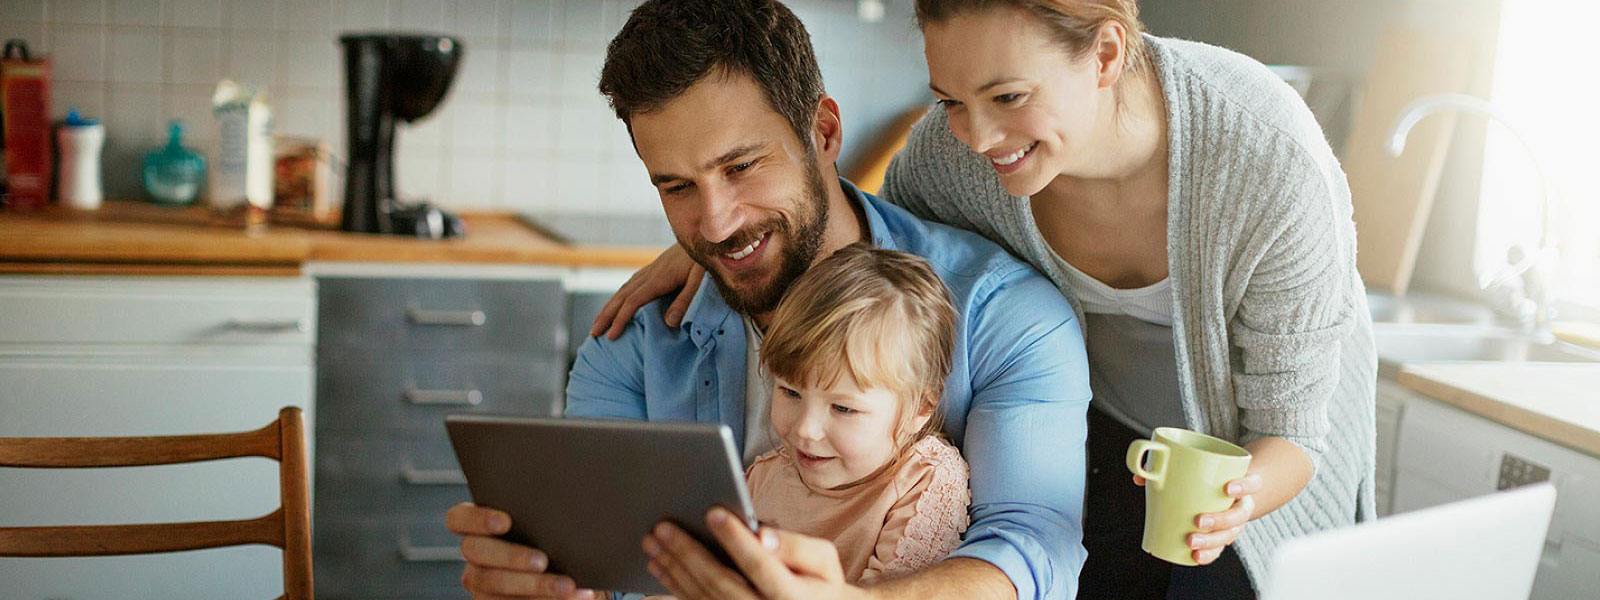 Young family looking at tablet in kitchen